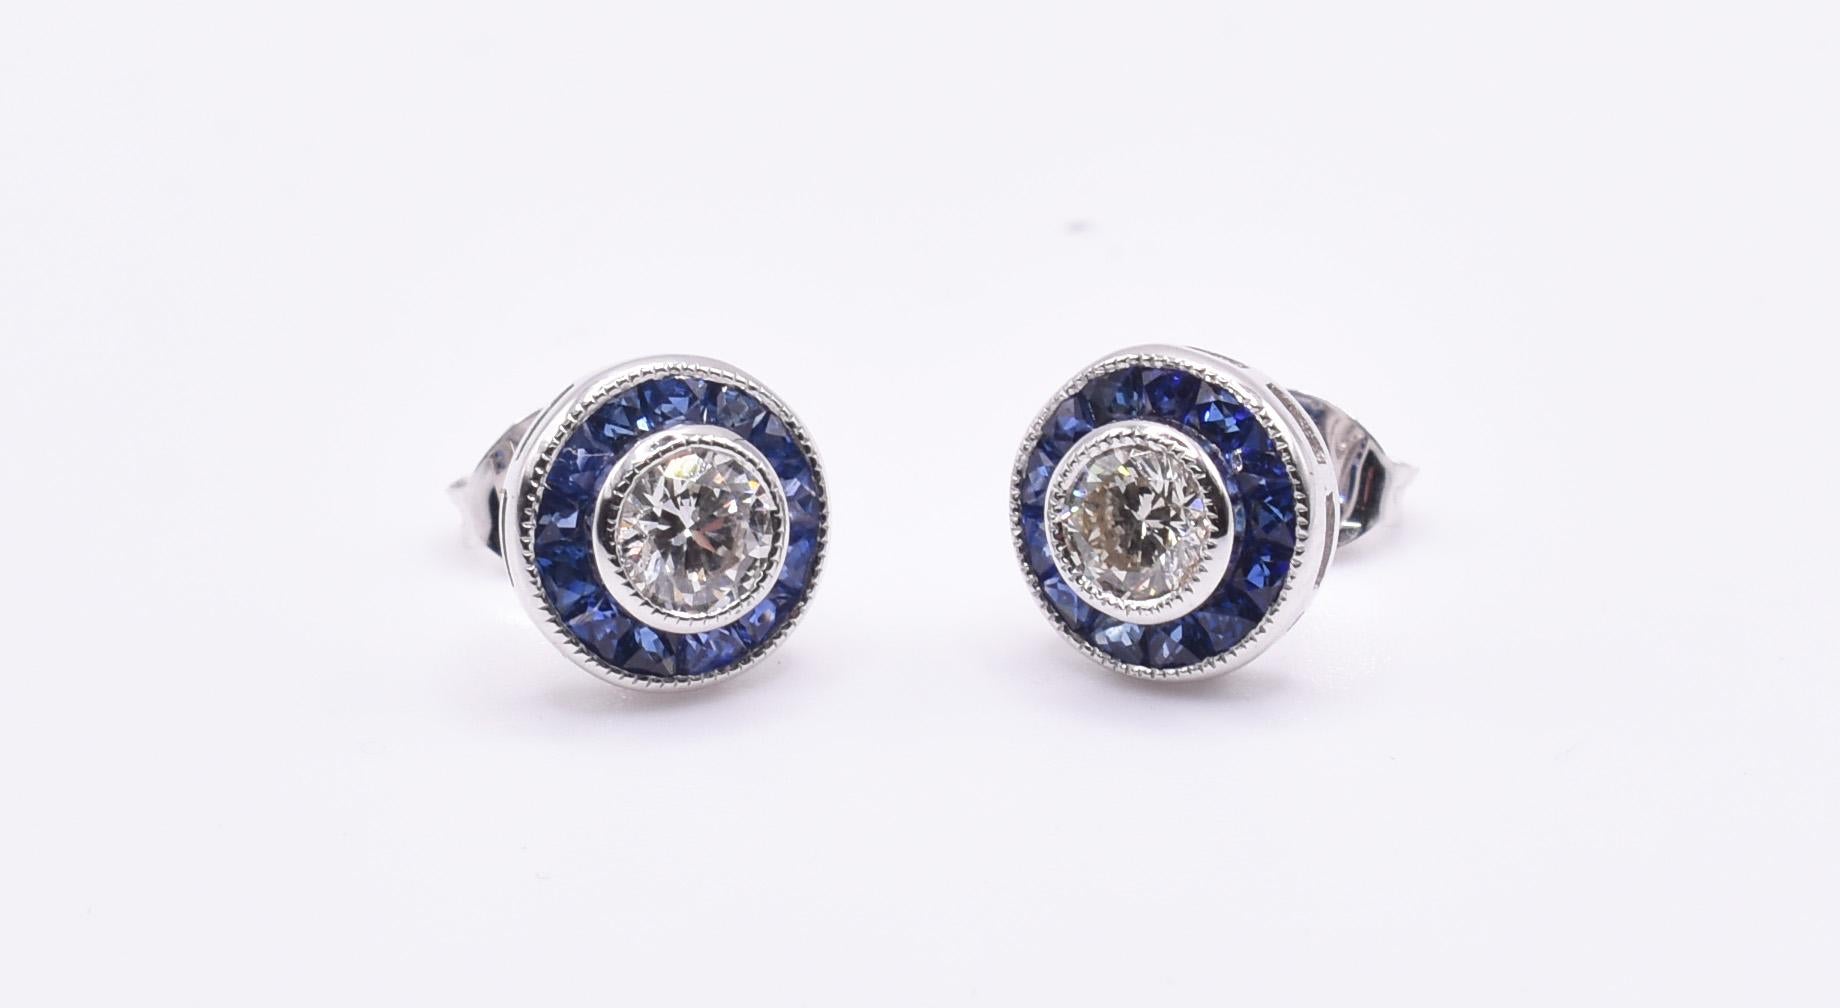 A splendid pair of 18k white gold diamond and sapphire earrings, featuring a lovely bezel set sapphires with round brilliant cut diamonds to the centre.

Metal: 18k White Gold
Total Carat Weight: 0.50ct (per ear)